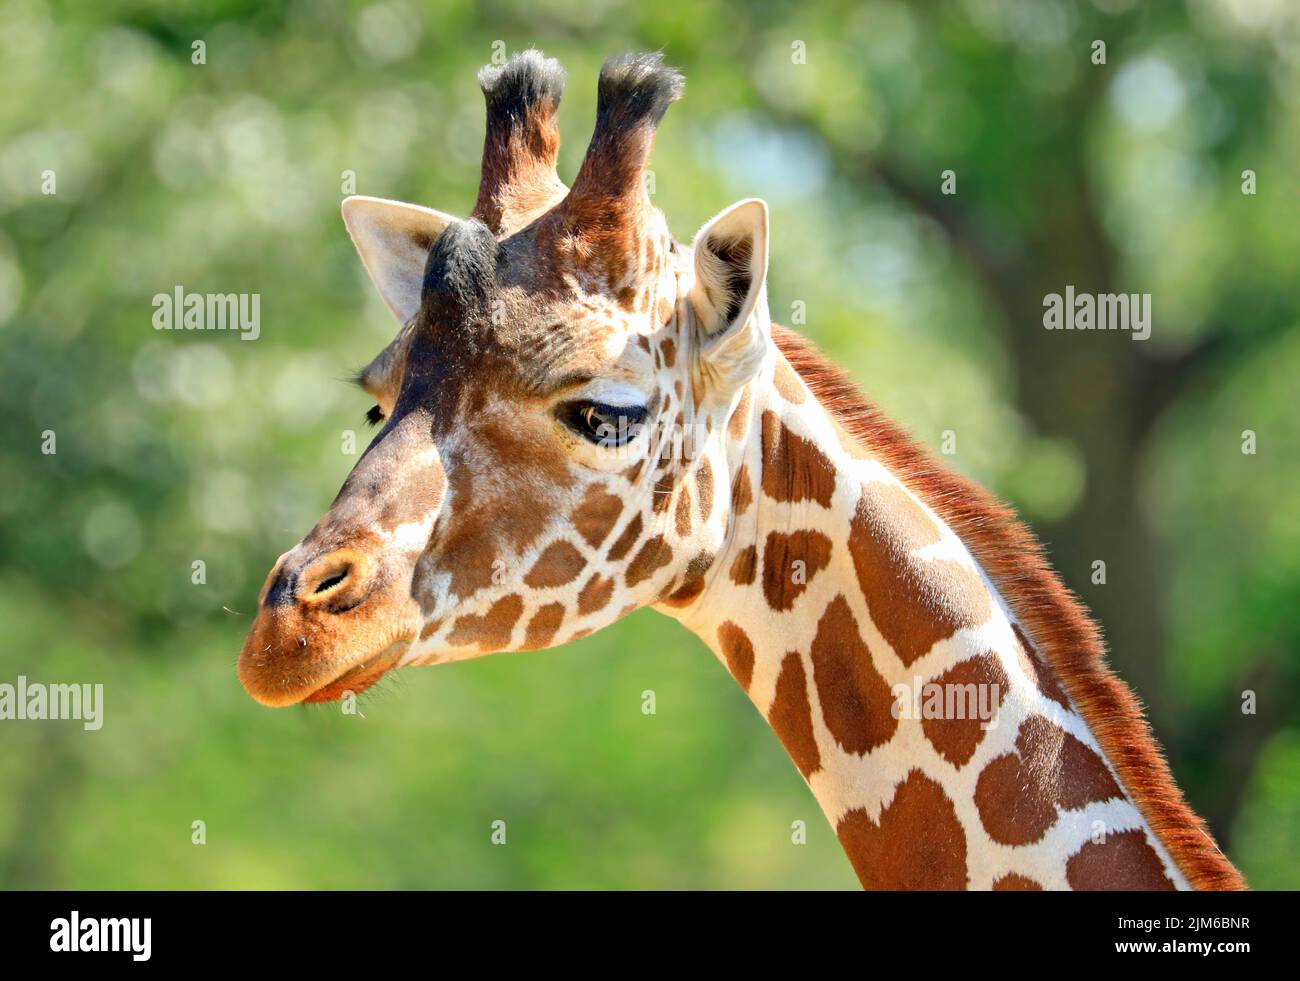 Giraffe head and neck closeup portrait with green background Stock Photo